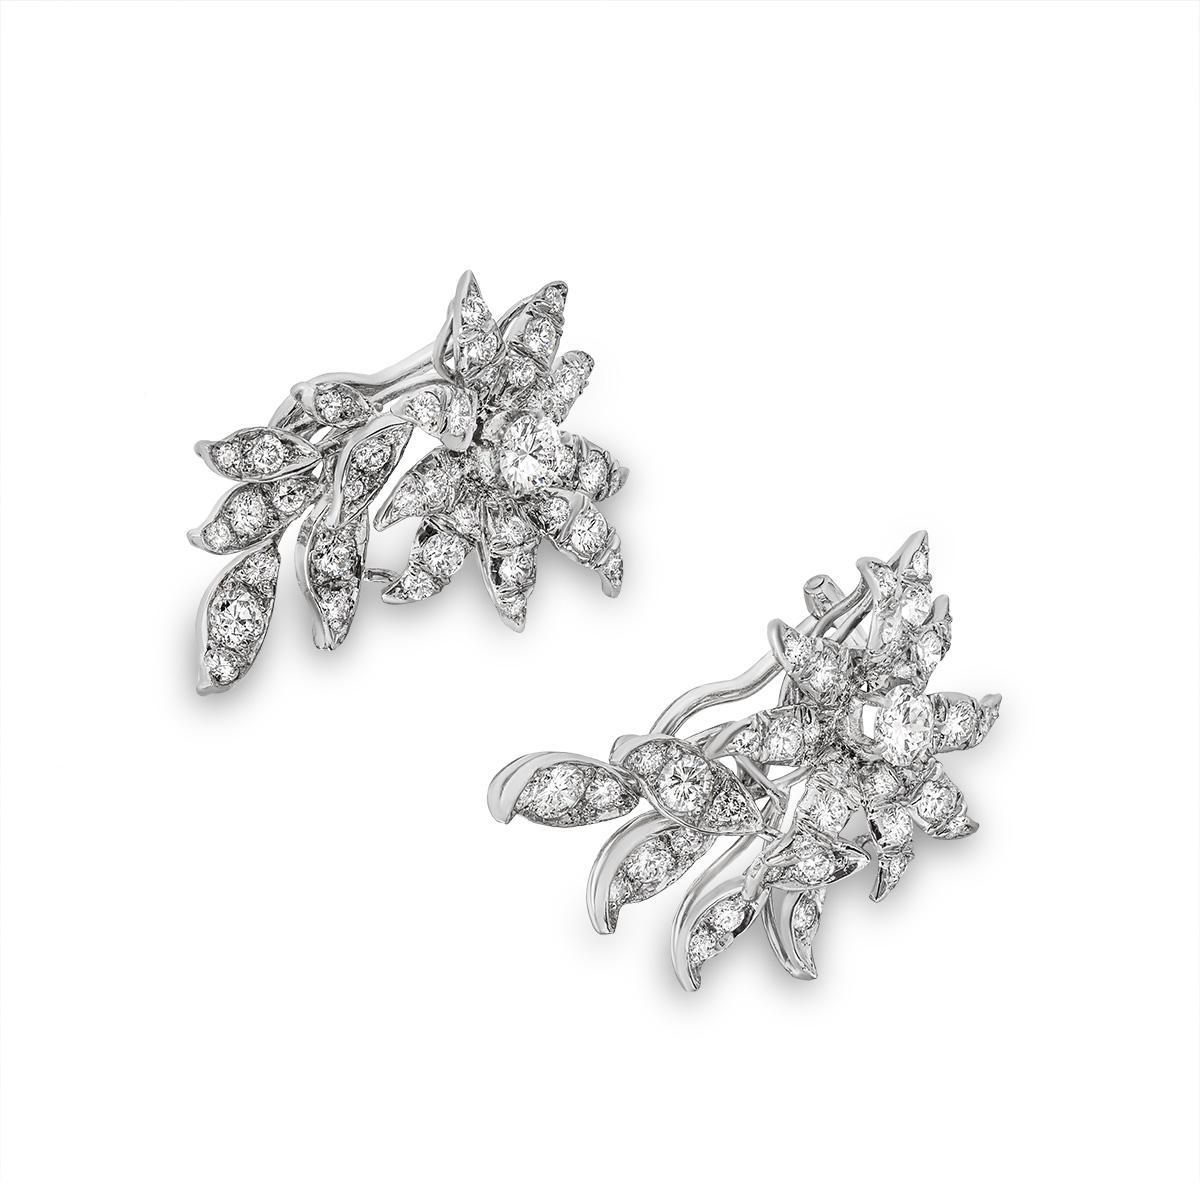 A unique pair of 18k white gold diamond clip-on earrings. The earrings feature a floral design each set to the centre with a round brilliant cut diamond weighing approximately 0.35ct, F-G colour and VS clarity. Further complementing the centre